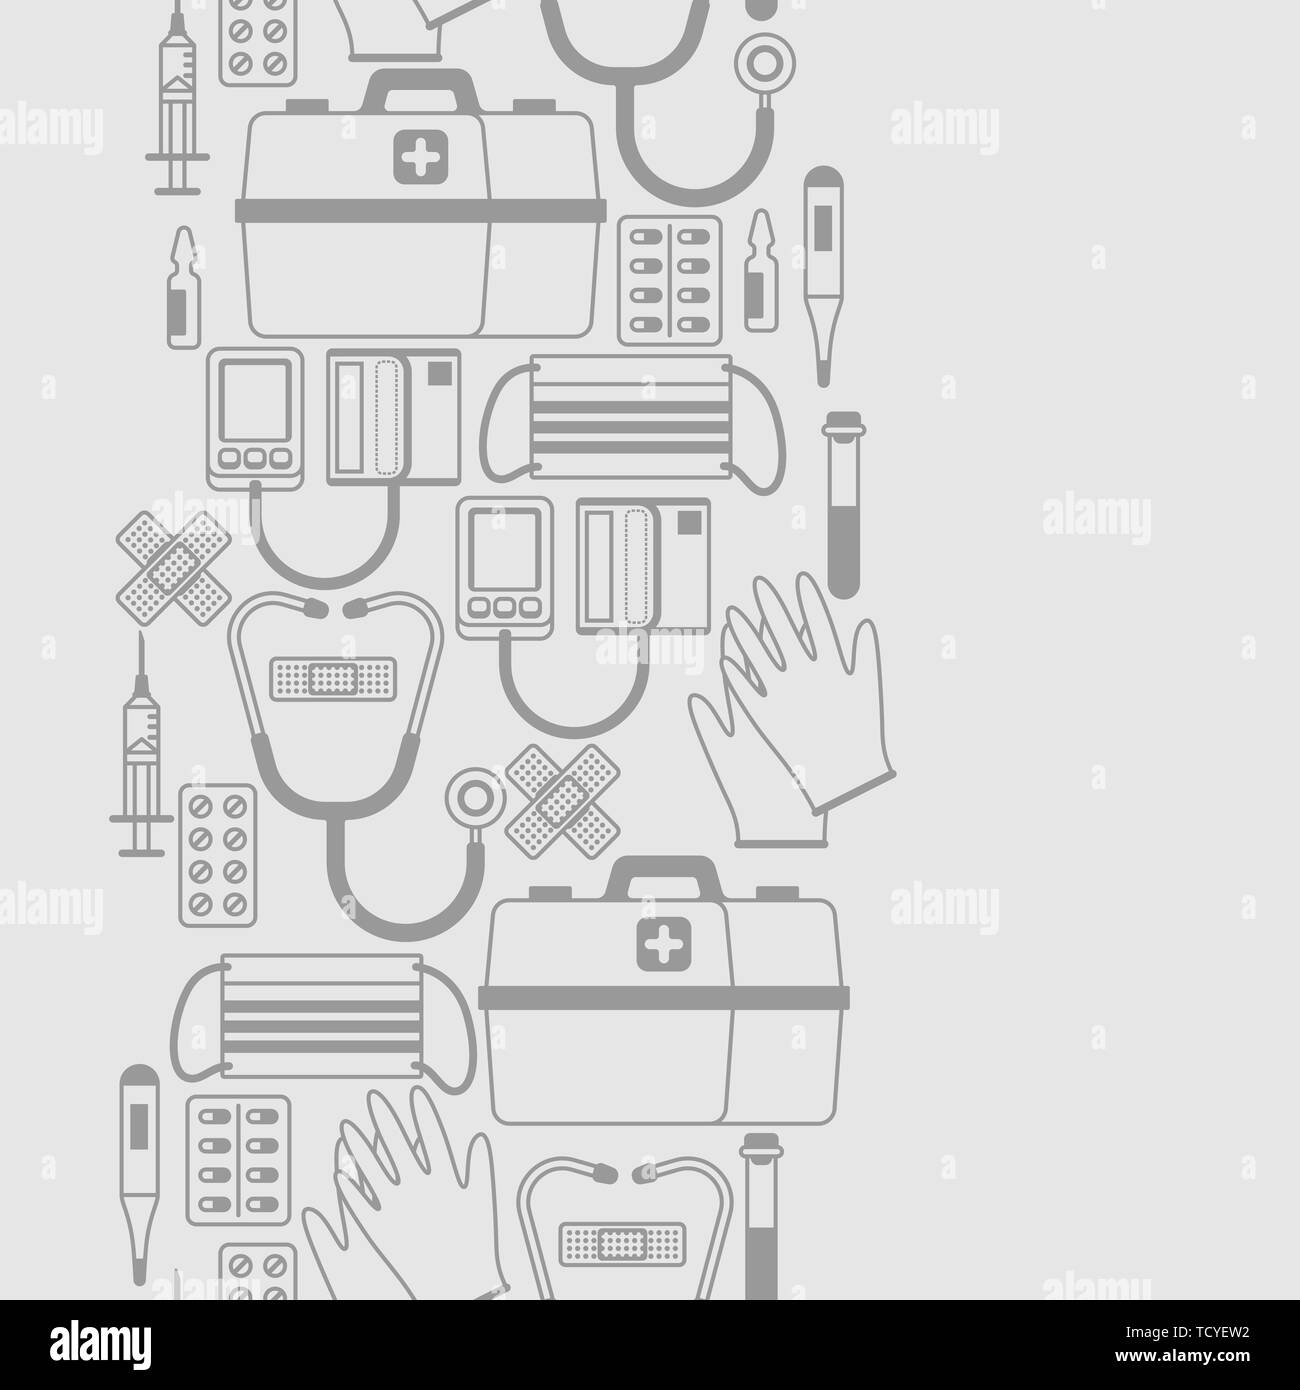 First aid kit equipment seamless pattern. Stock Vector